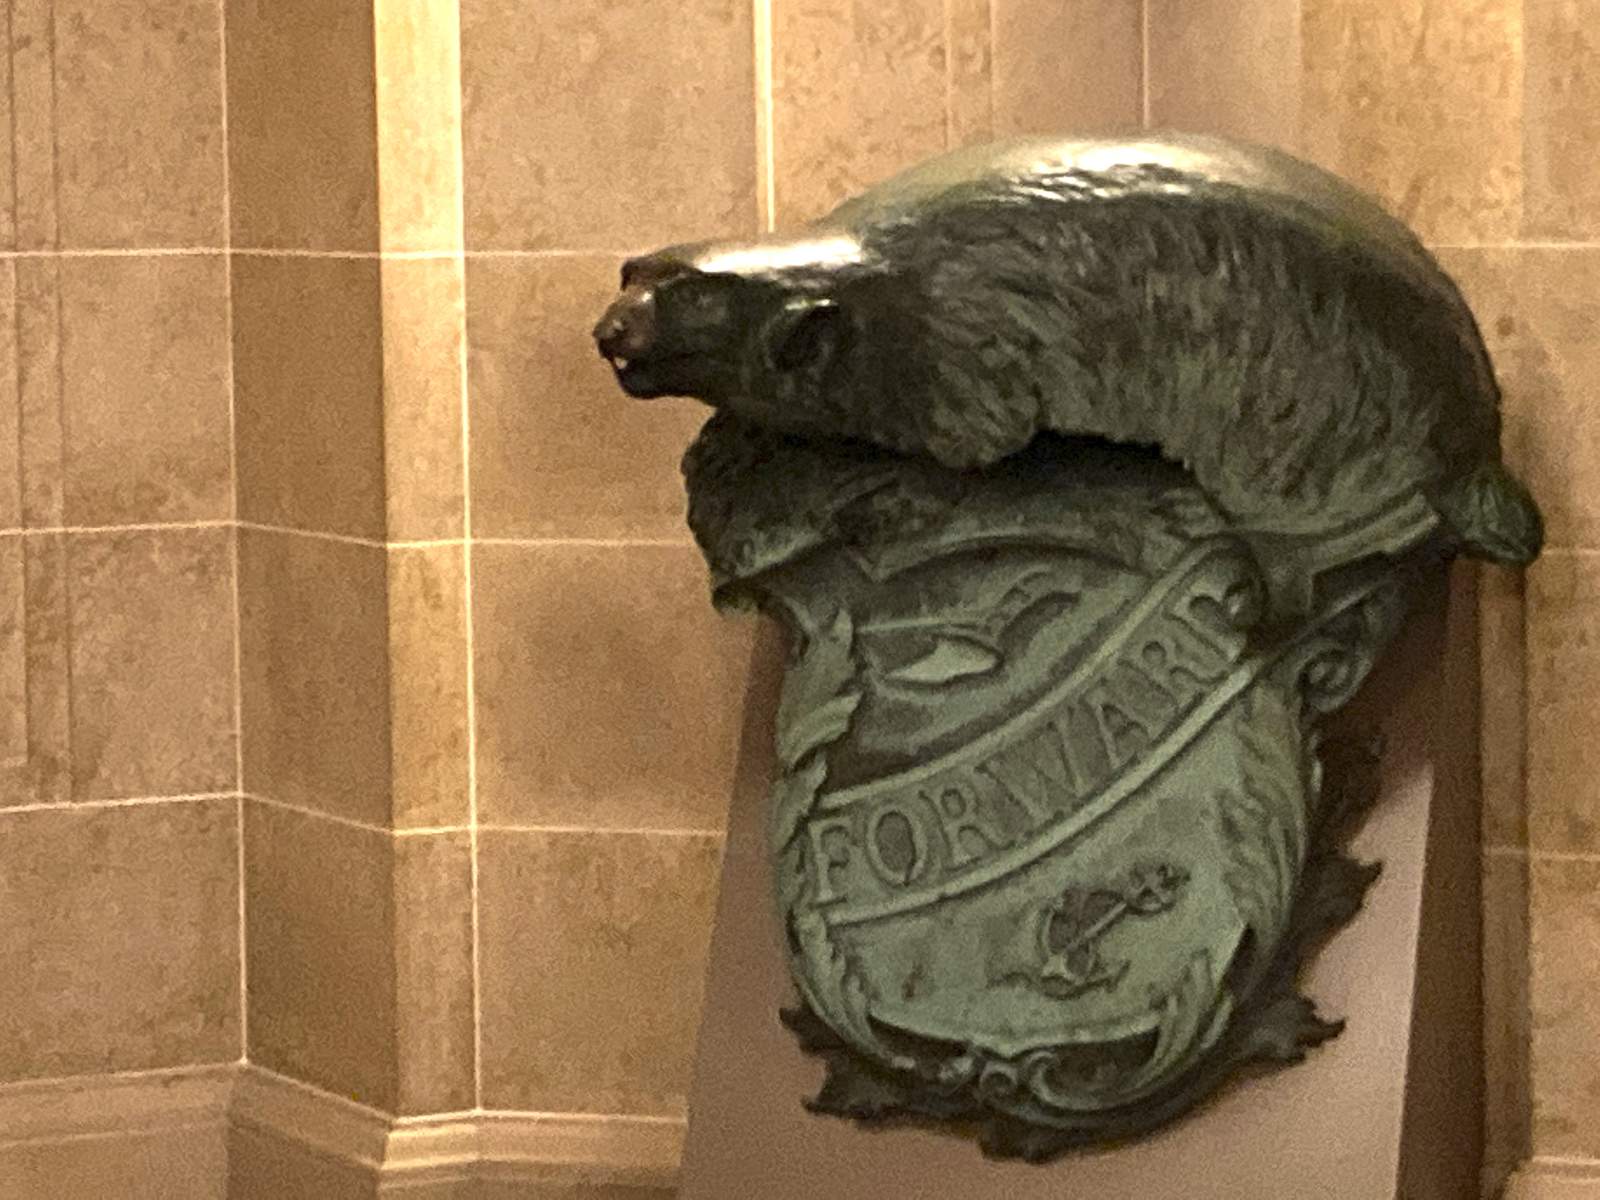 Navy pauses plan to move Wisconsin badger to Virginia museum